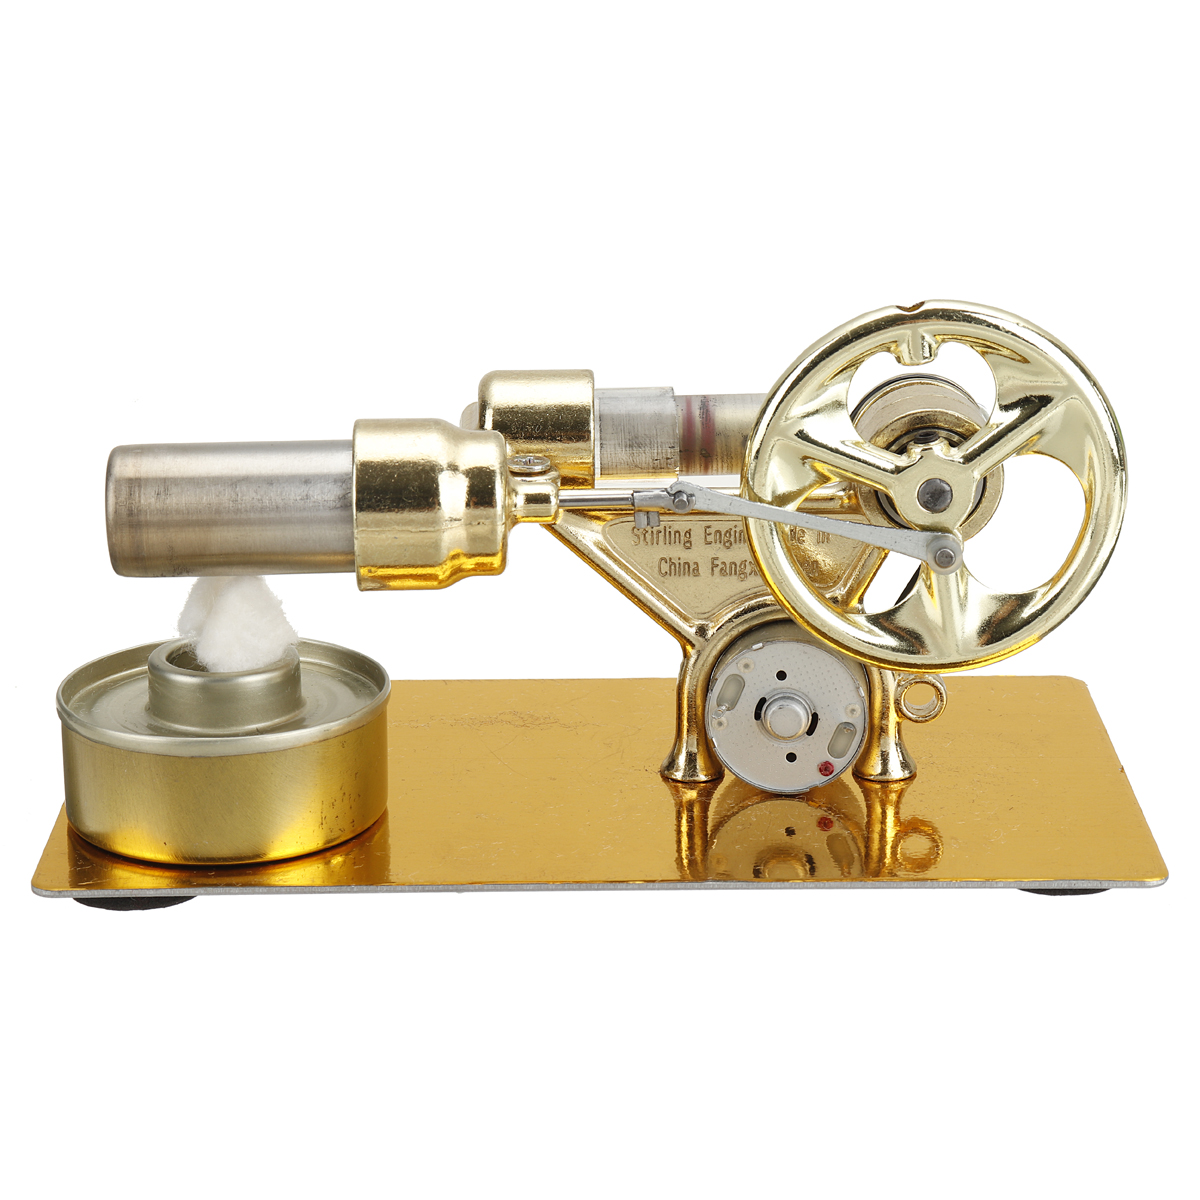 1PC-16-x-85-x-11-cm--Physical-Science-DIY-Kits-Stirling-Engine-Model-with-Parts-1939762-7